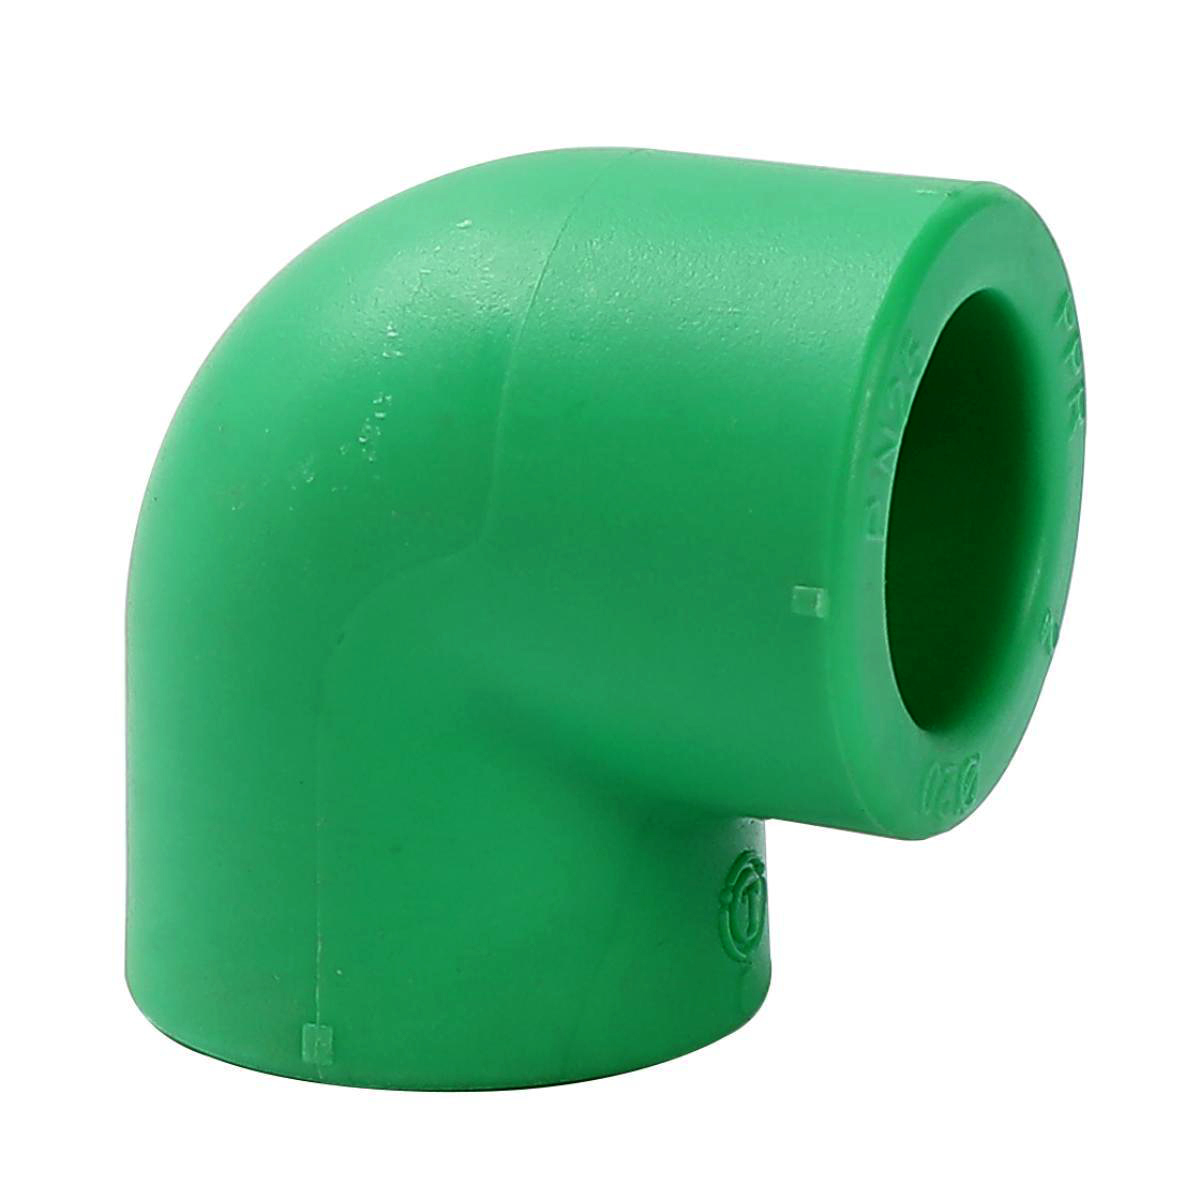 plastic-pipe-ppr-water-pipe-fittings-elbow-90